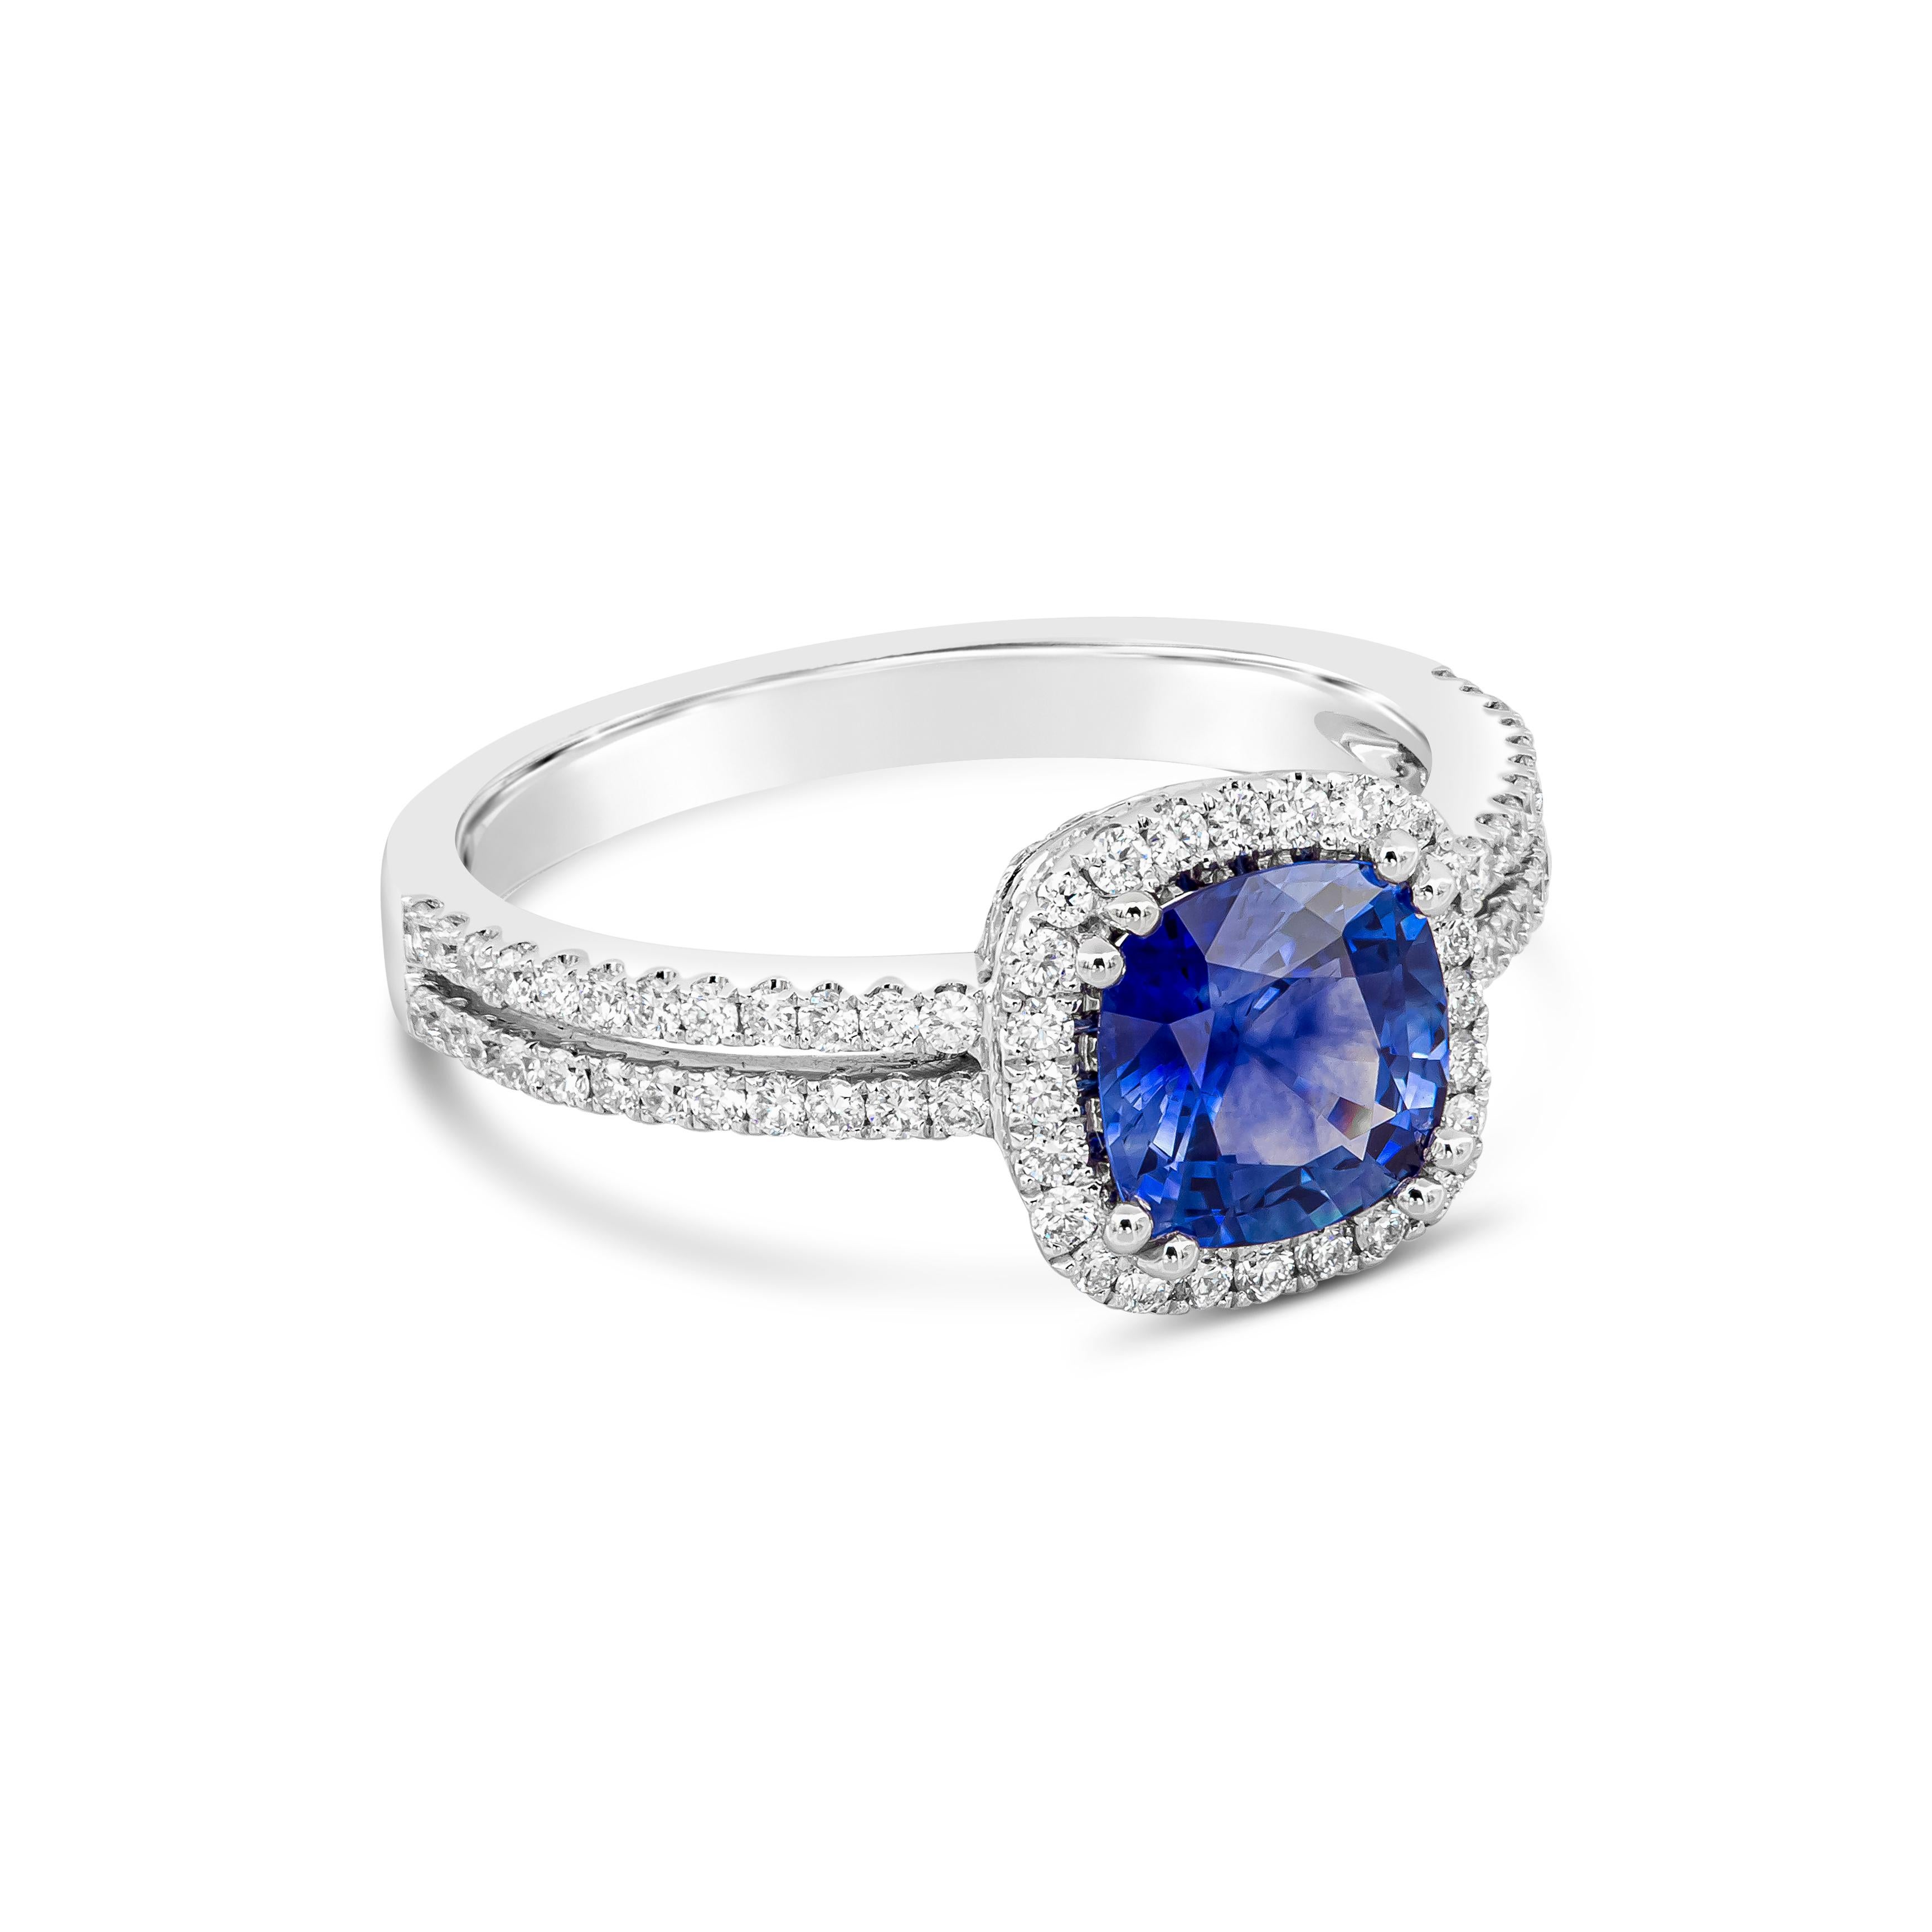 A timeless piece featuring a vibrant cushion cut blue sapphire weighing 1.35 carats, surrounded by a row of round brilliant diamonds. Set in a diamond encrusted double-row shank made in 18k white gold. Diamonds weigh 0.48 carats total.

Style